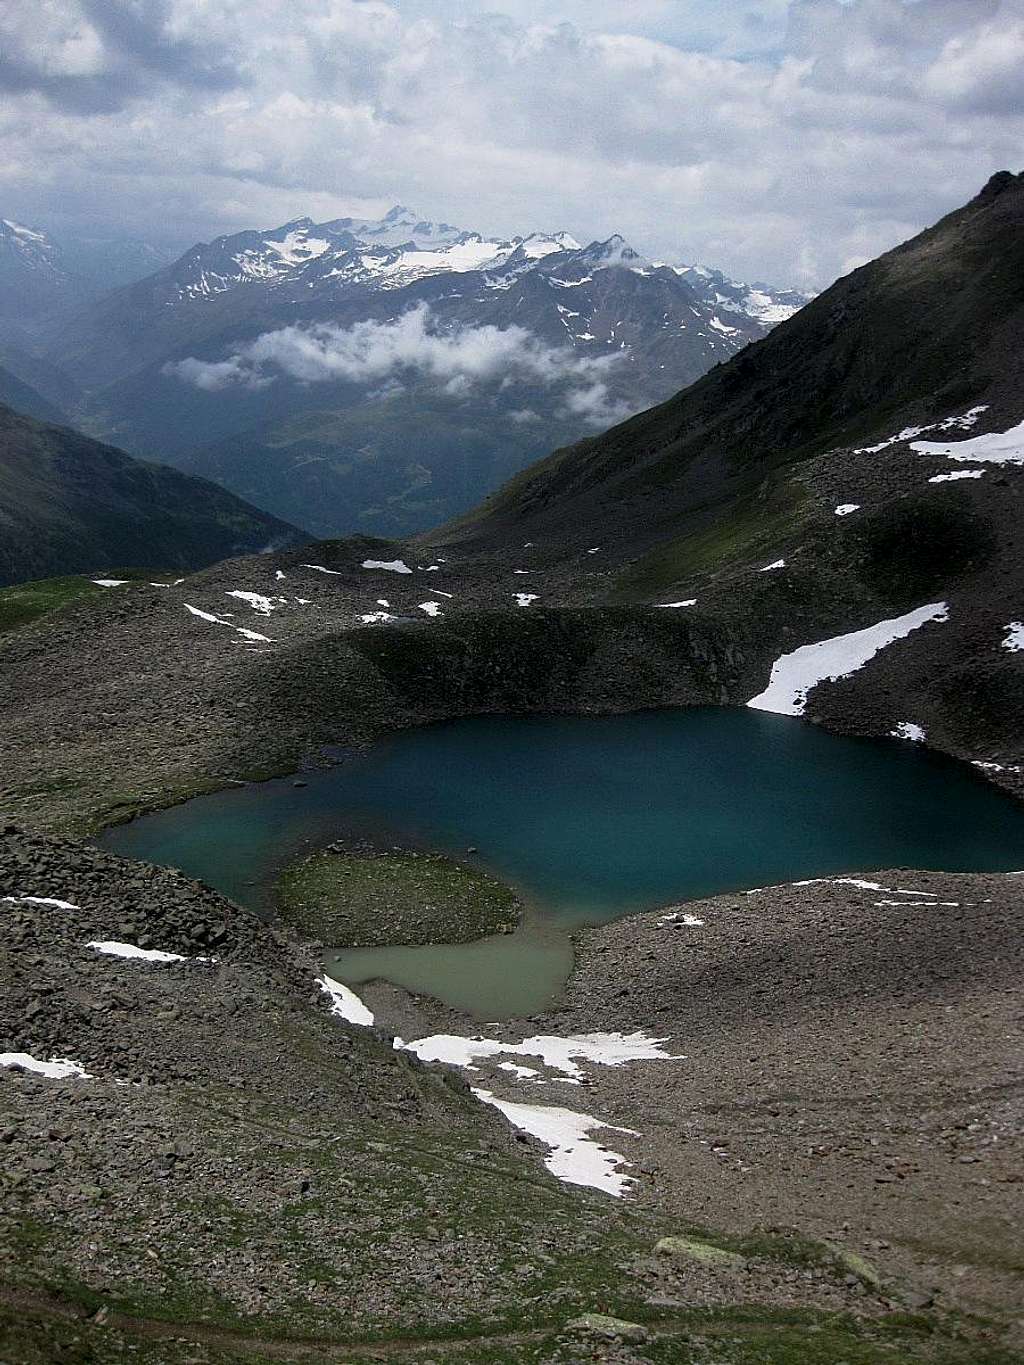 Looking down on the Seekarsee, with the Wildspitze in the background